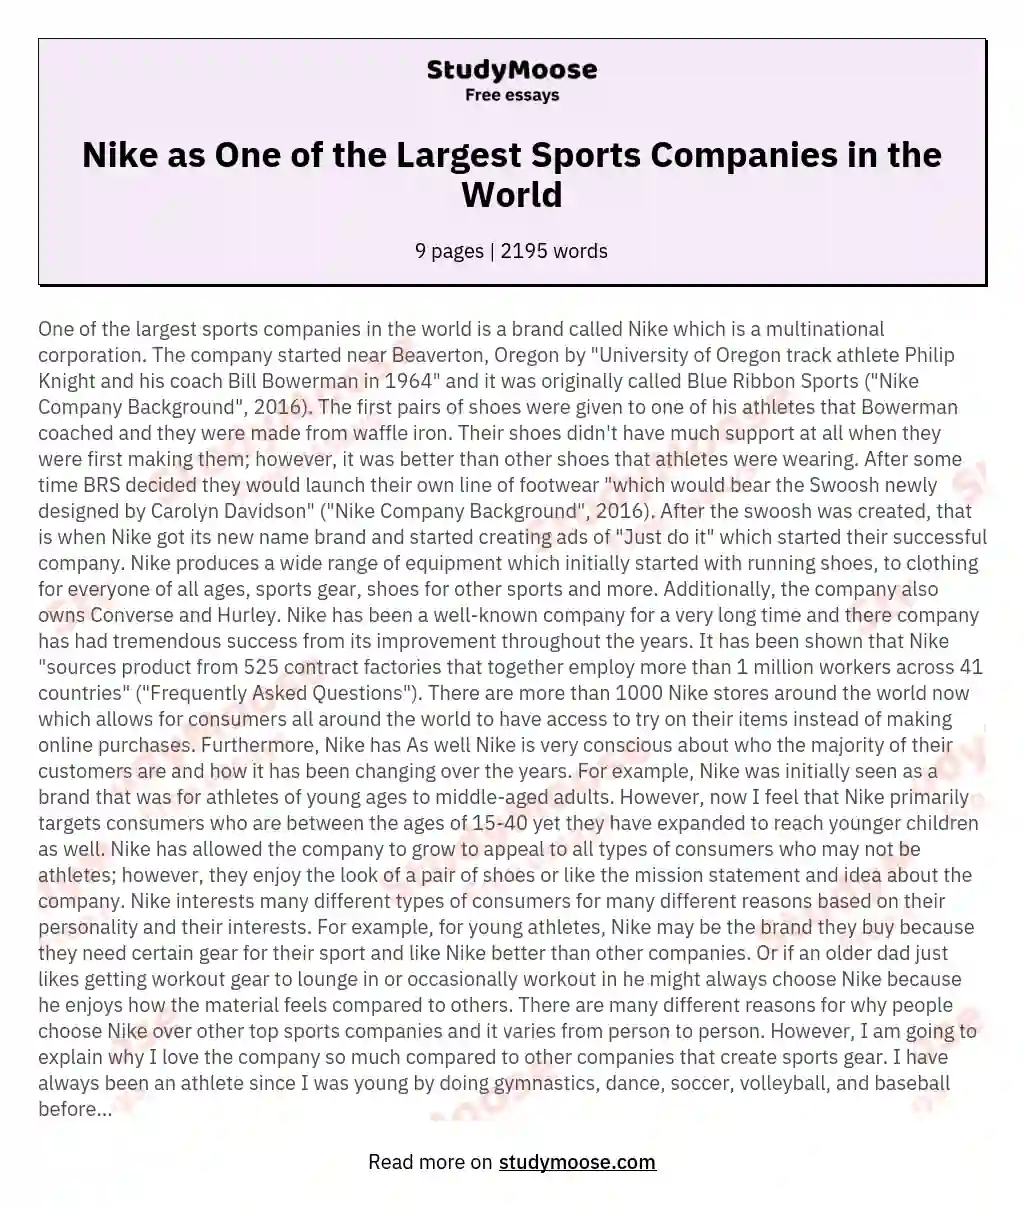 Nike as One of the Largest Sports Companies in the World essay